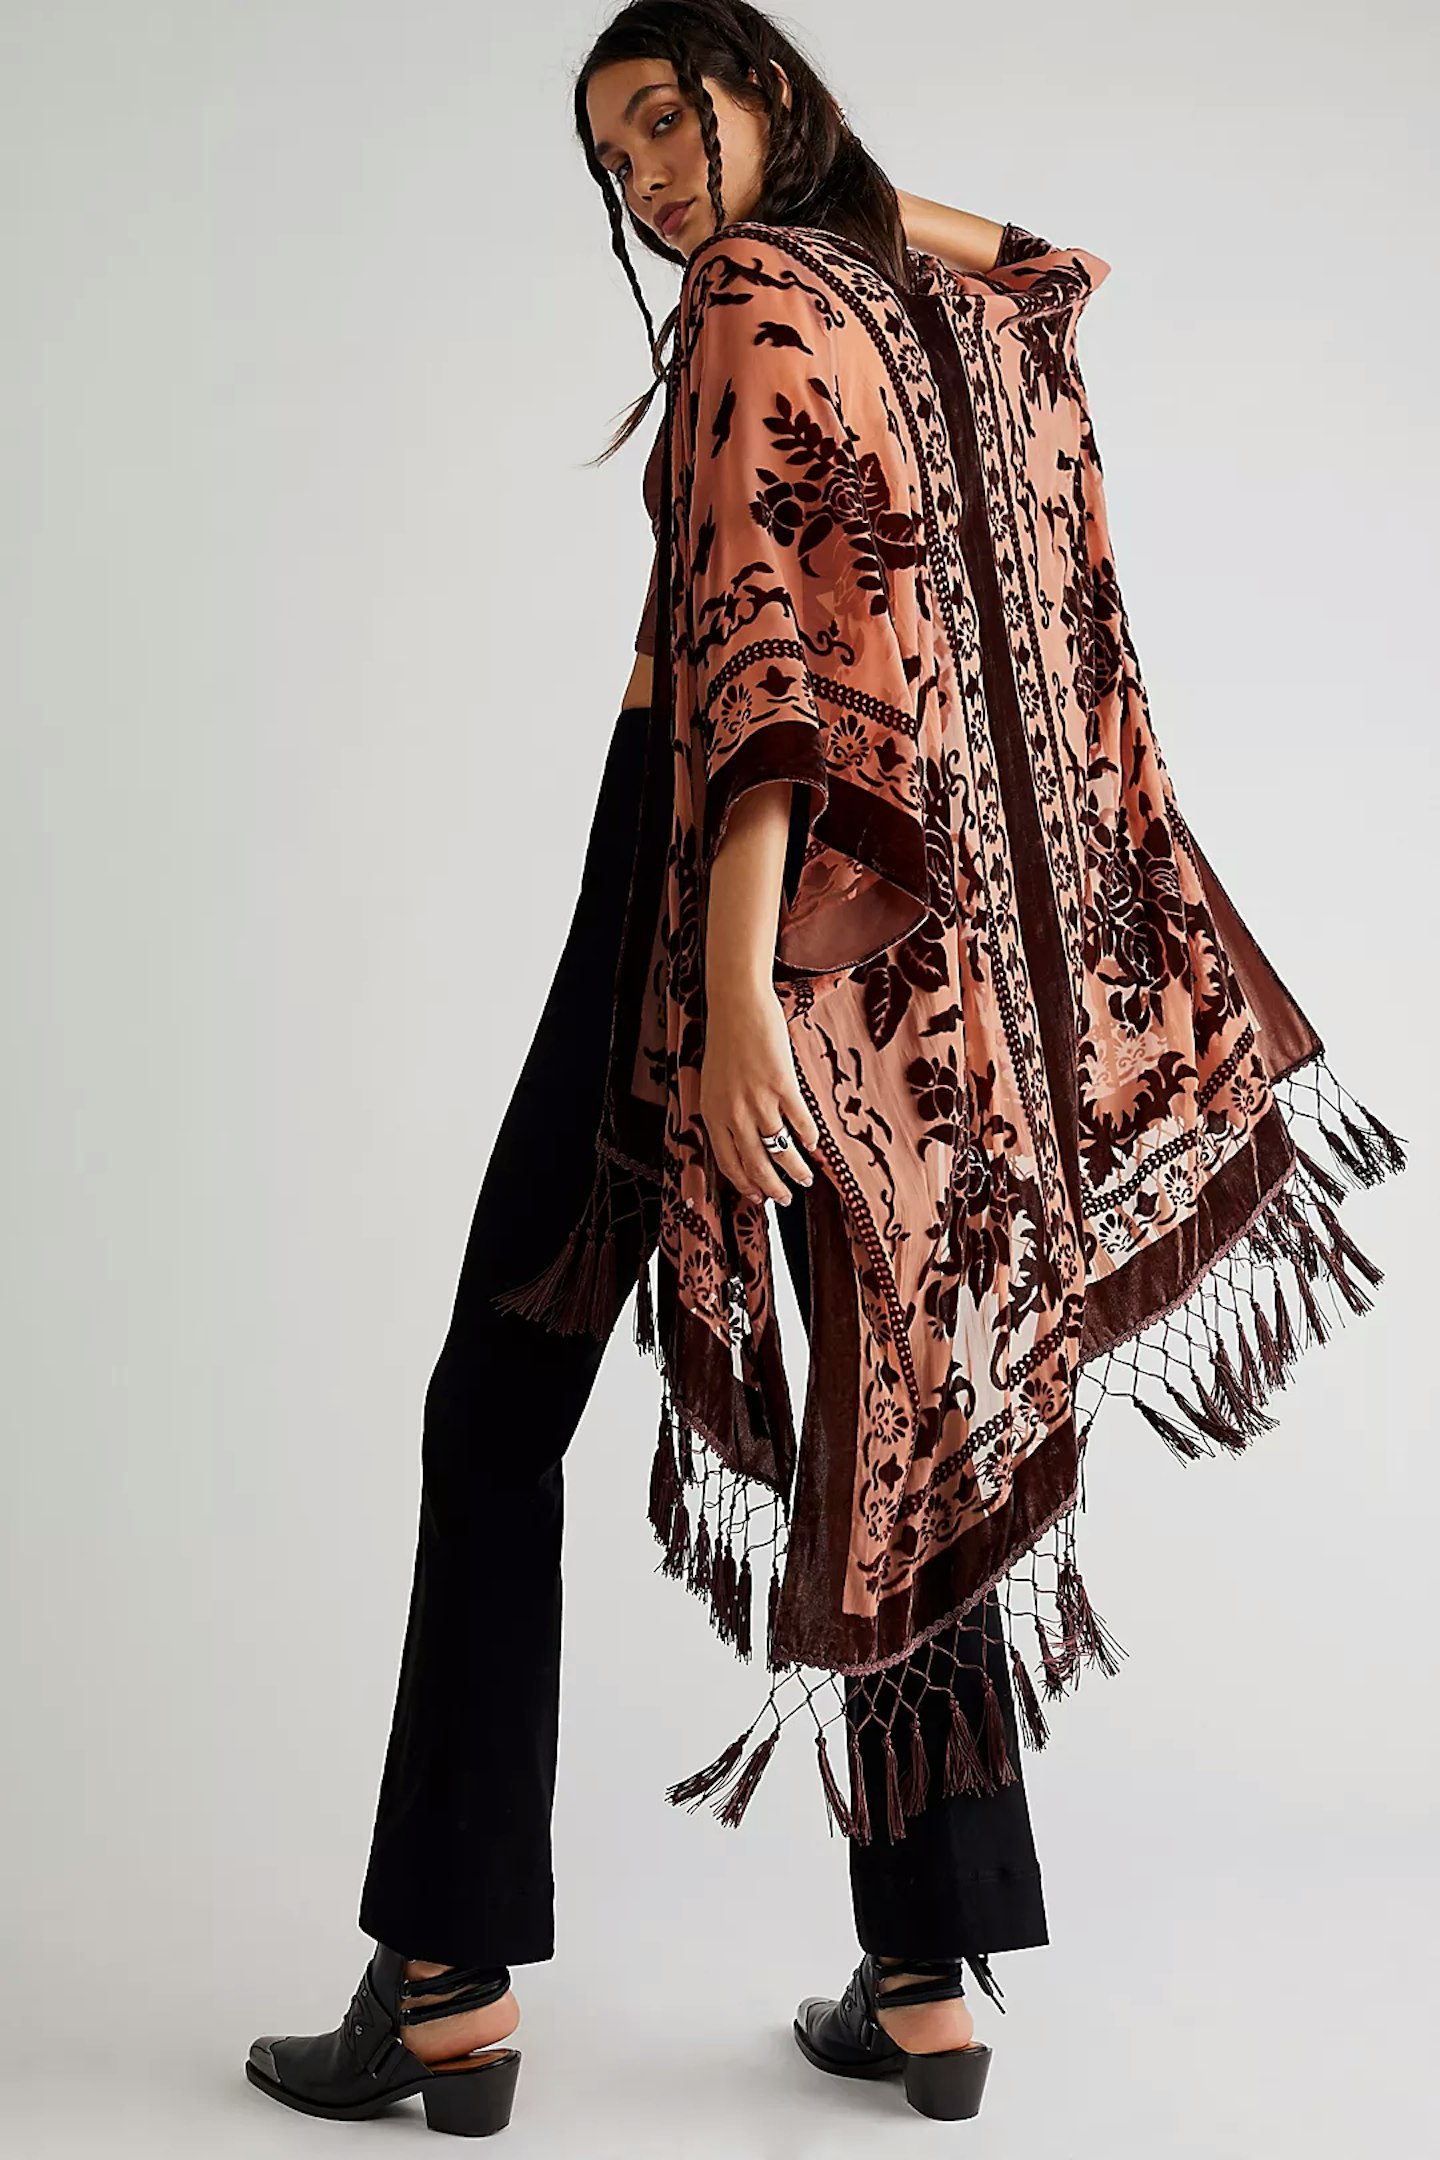 Free People Launched A Daisy Jones & The Six Collection Full Of Clothes ...